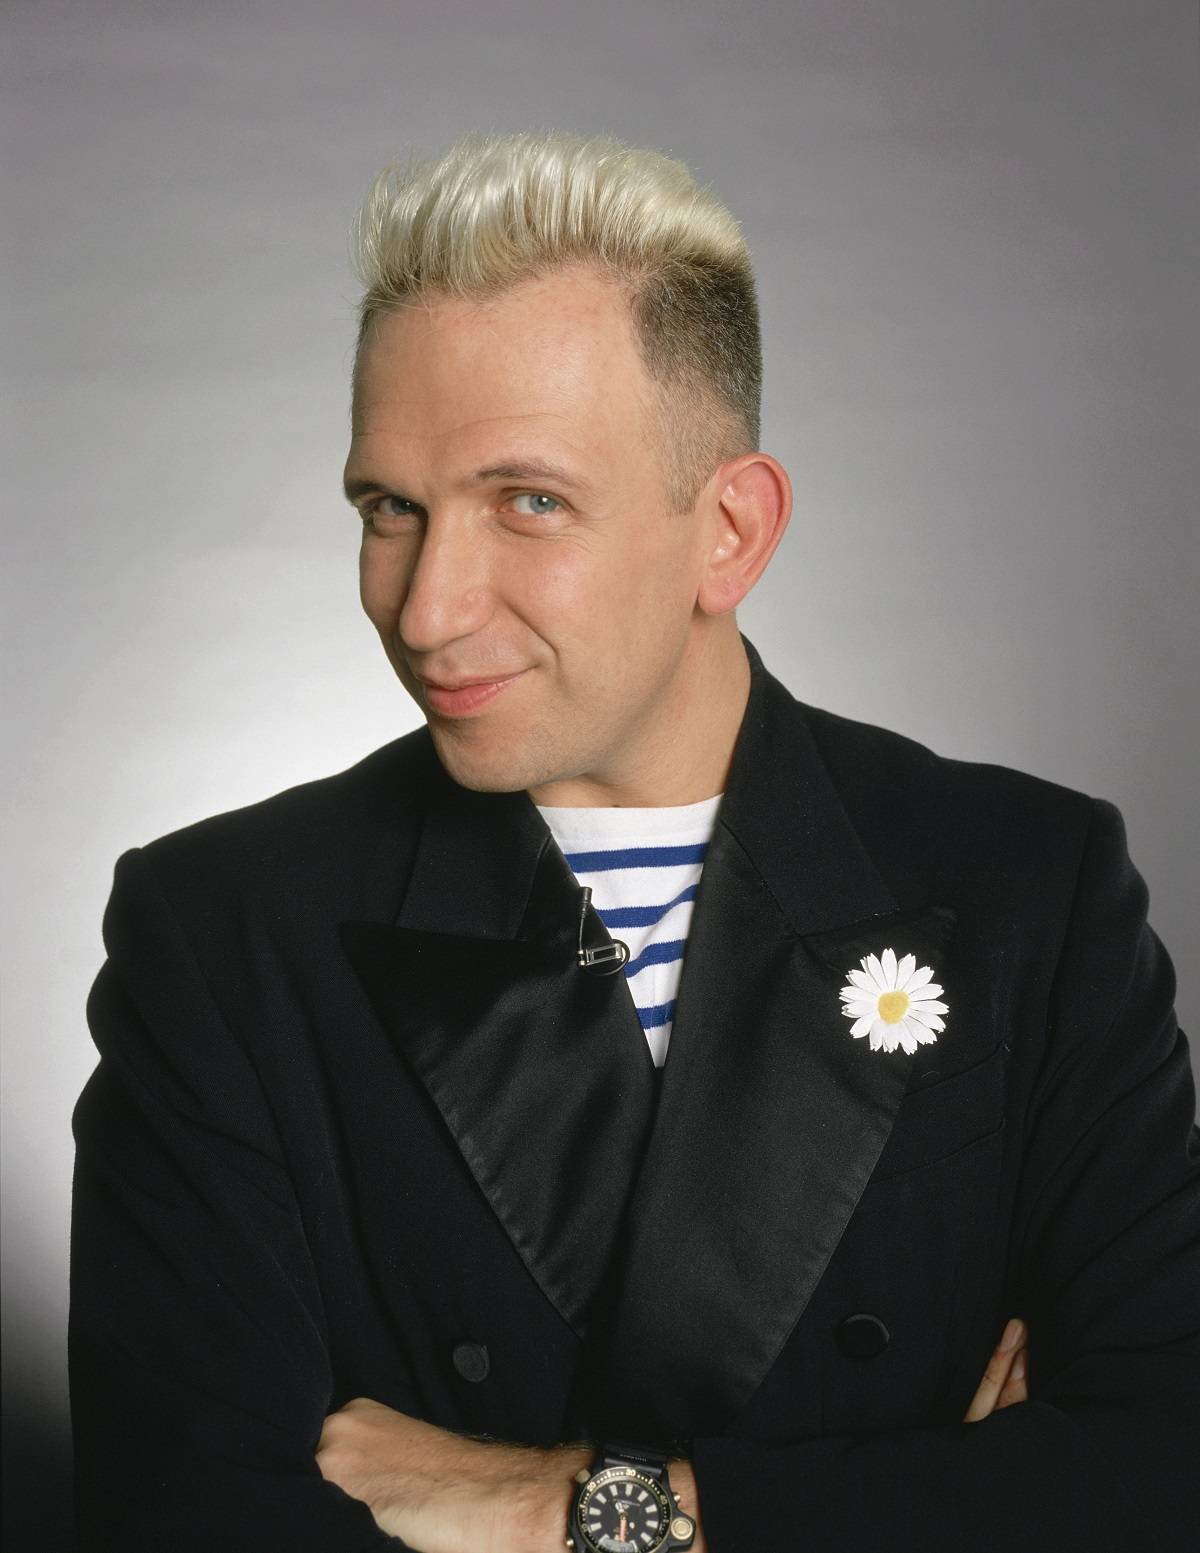 Jean Paul Gaultier ( Fot. Eric Fougere/Sygma, Getty Images)